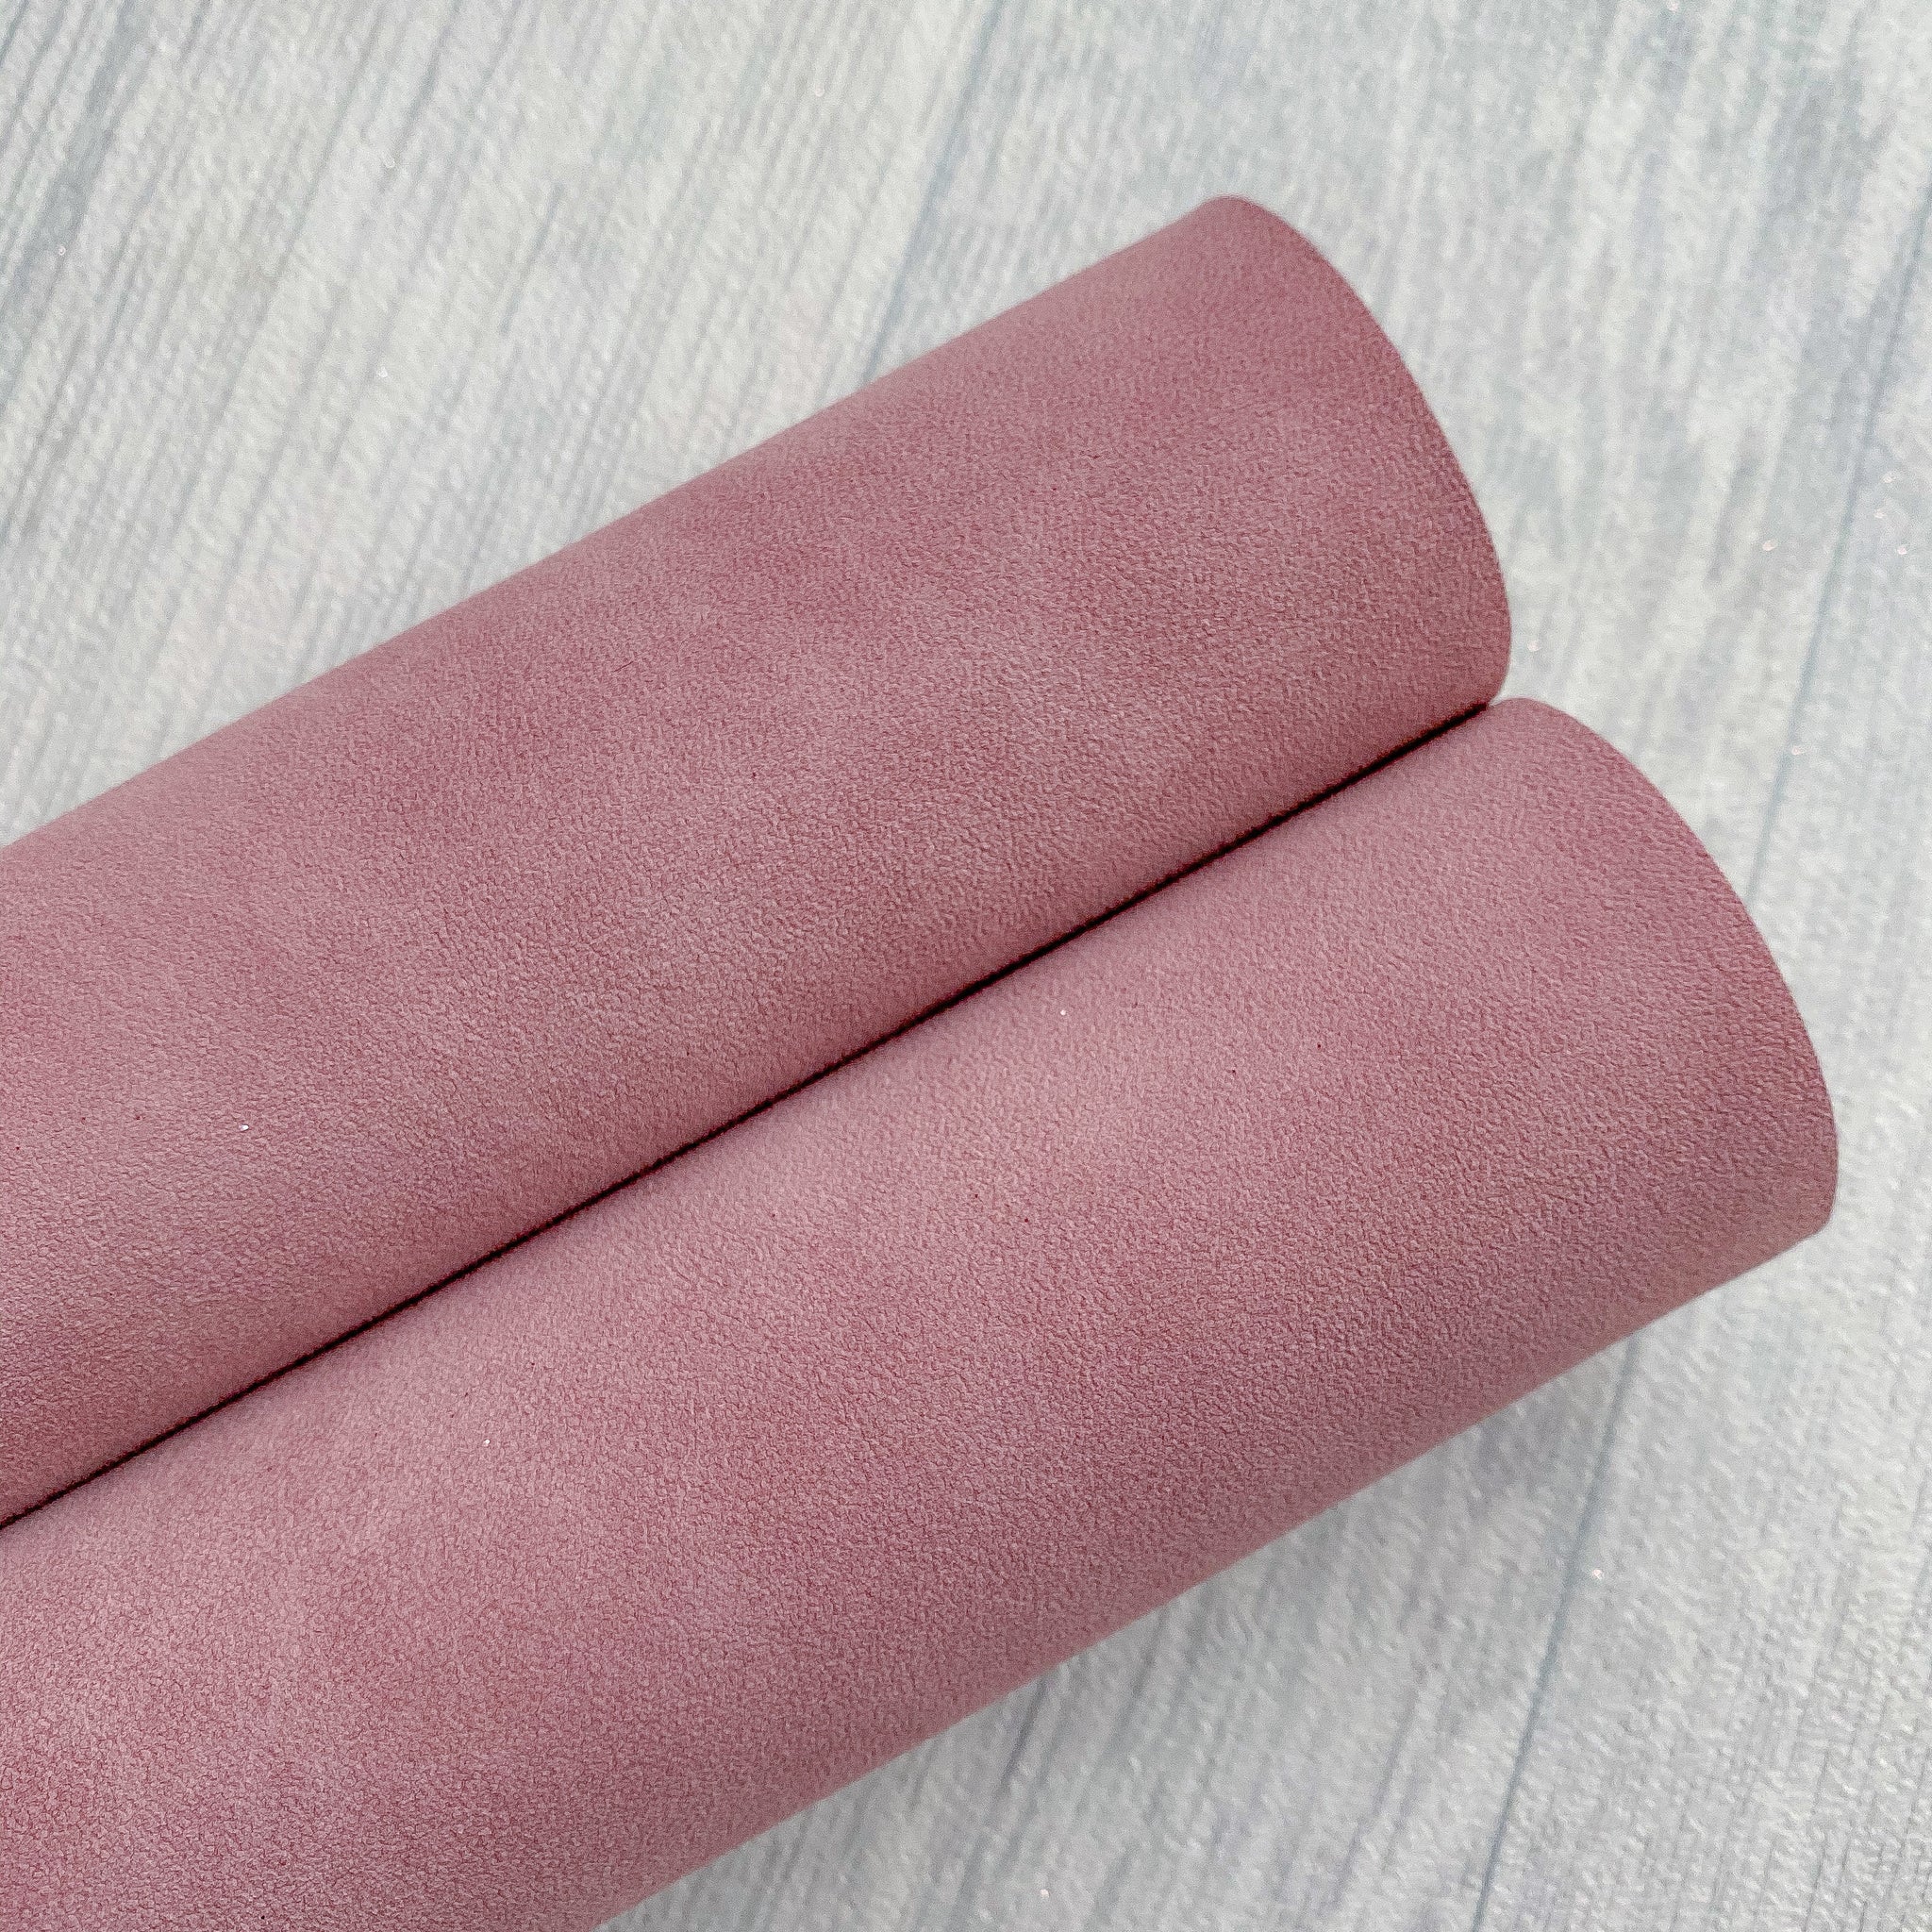 Pink suede fabric a4 sheet